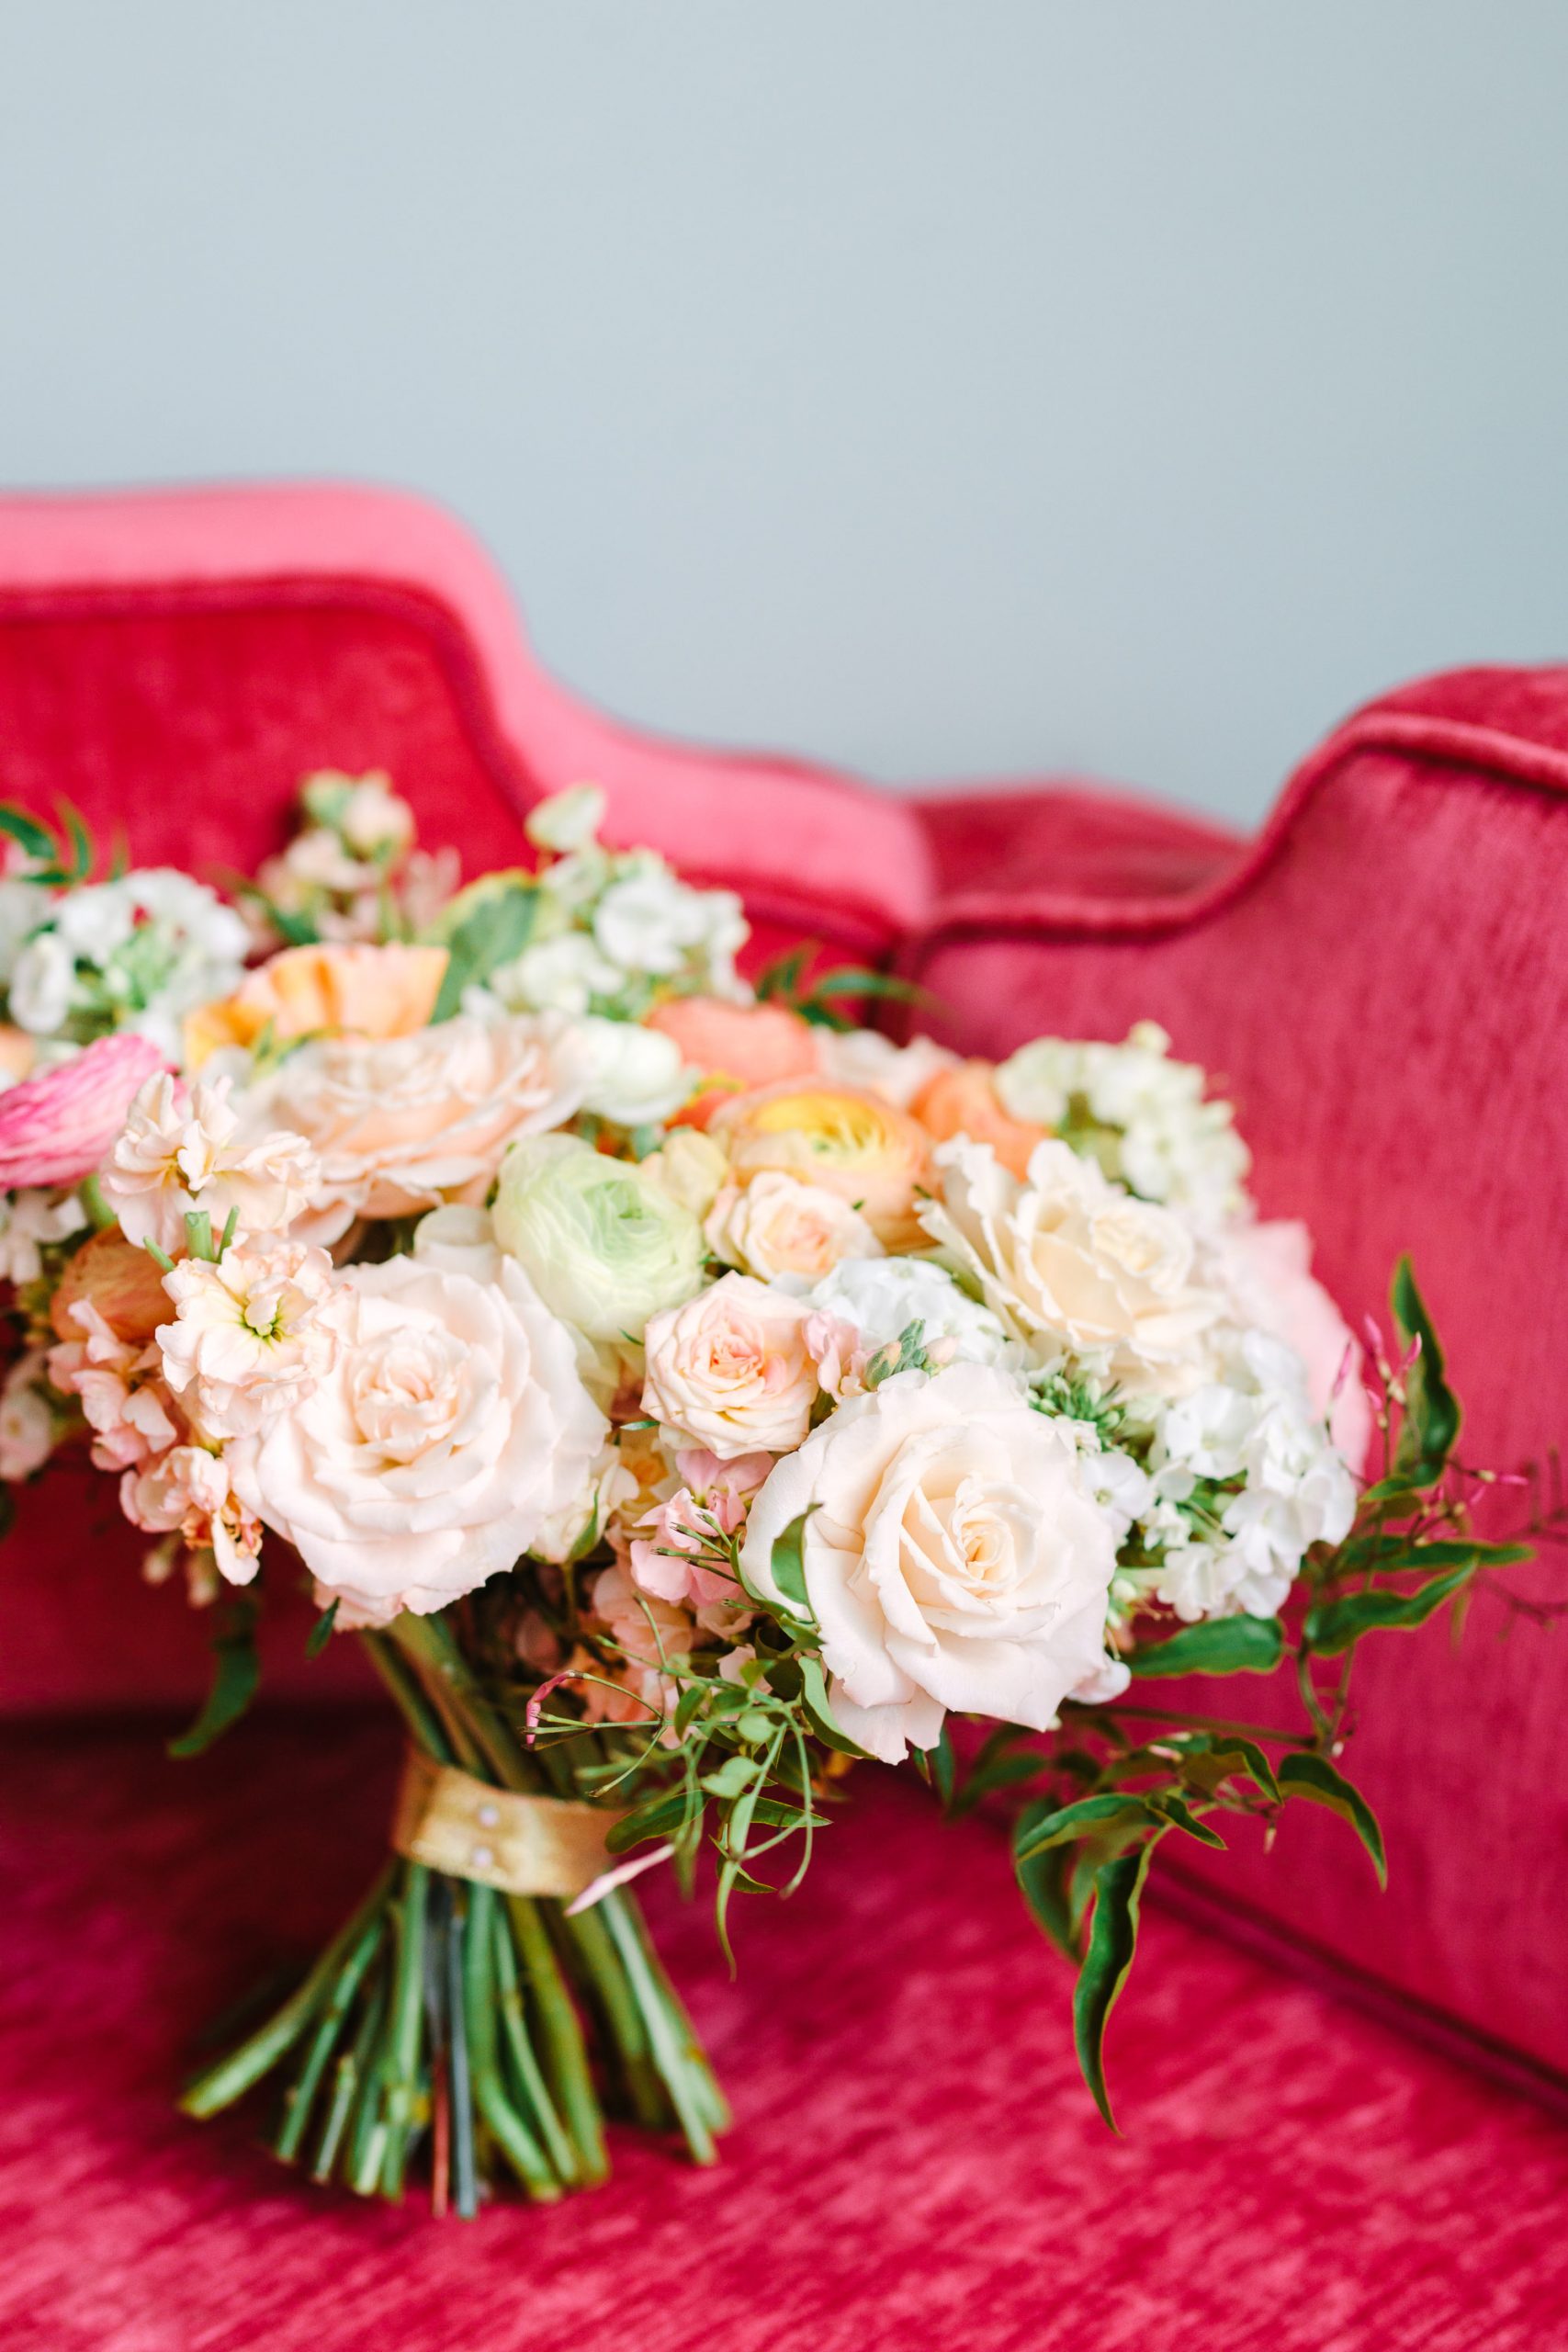 Bridal bouquet on pink couch by Mary Costa Photography